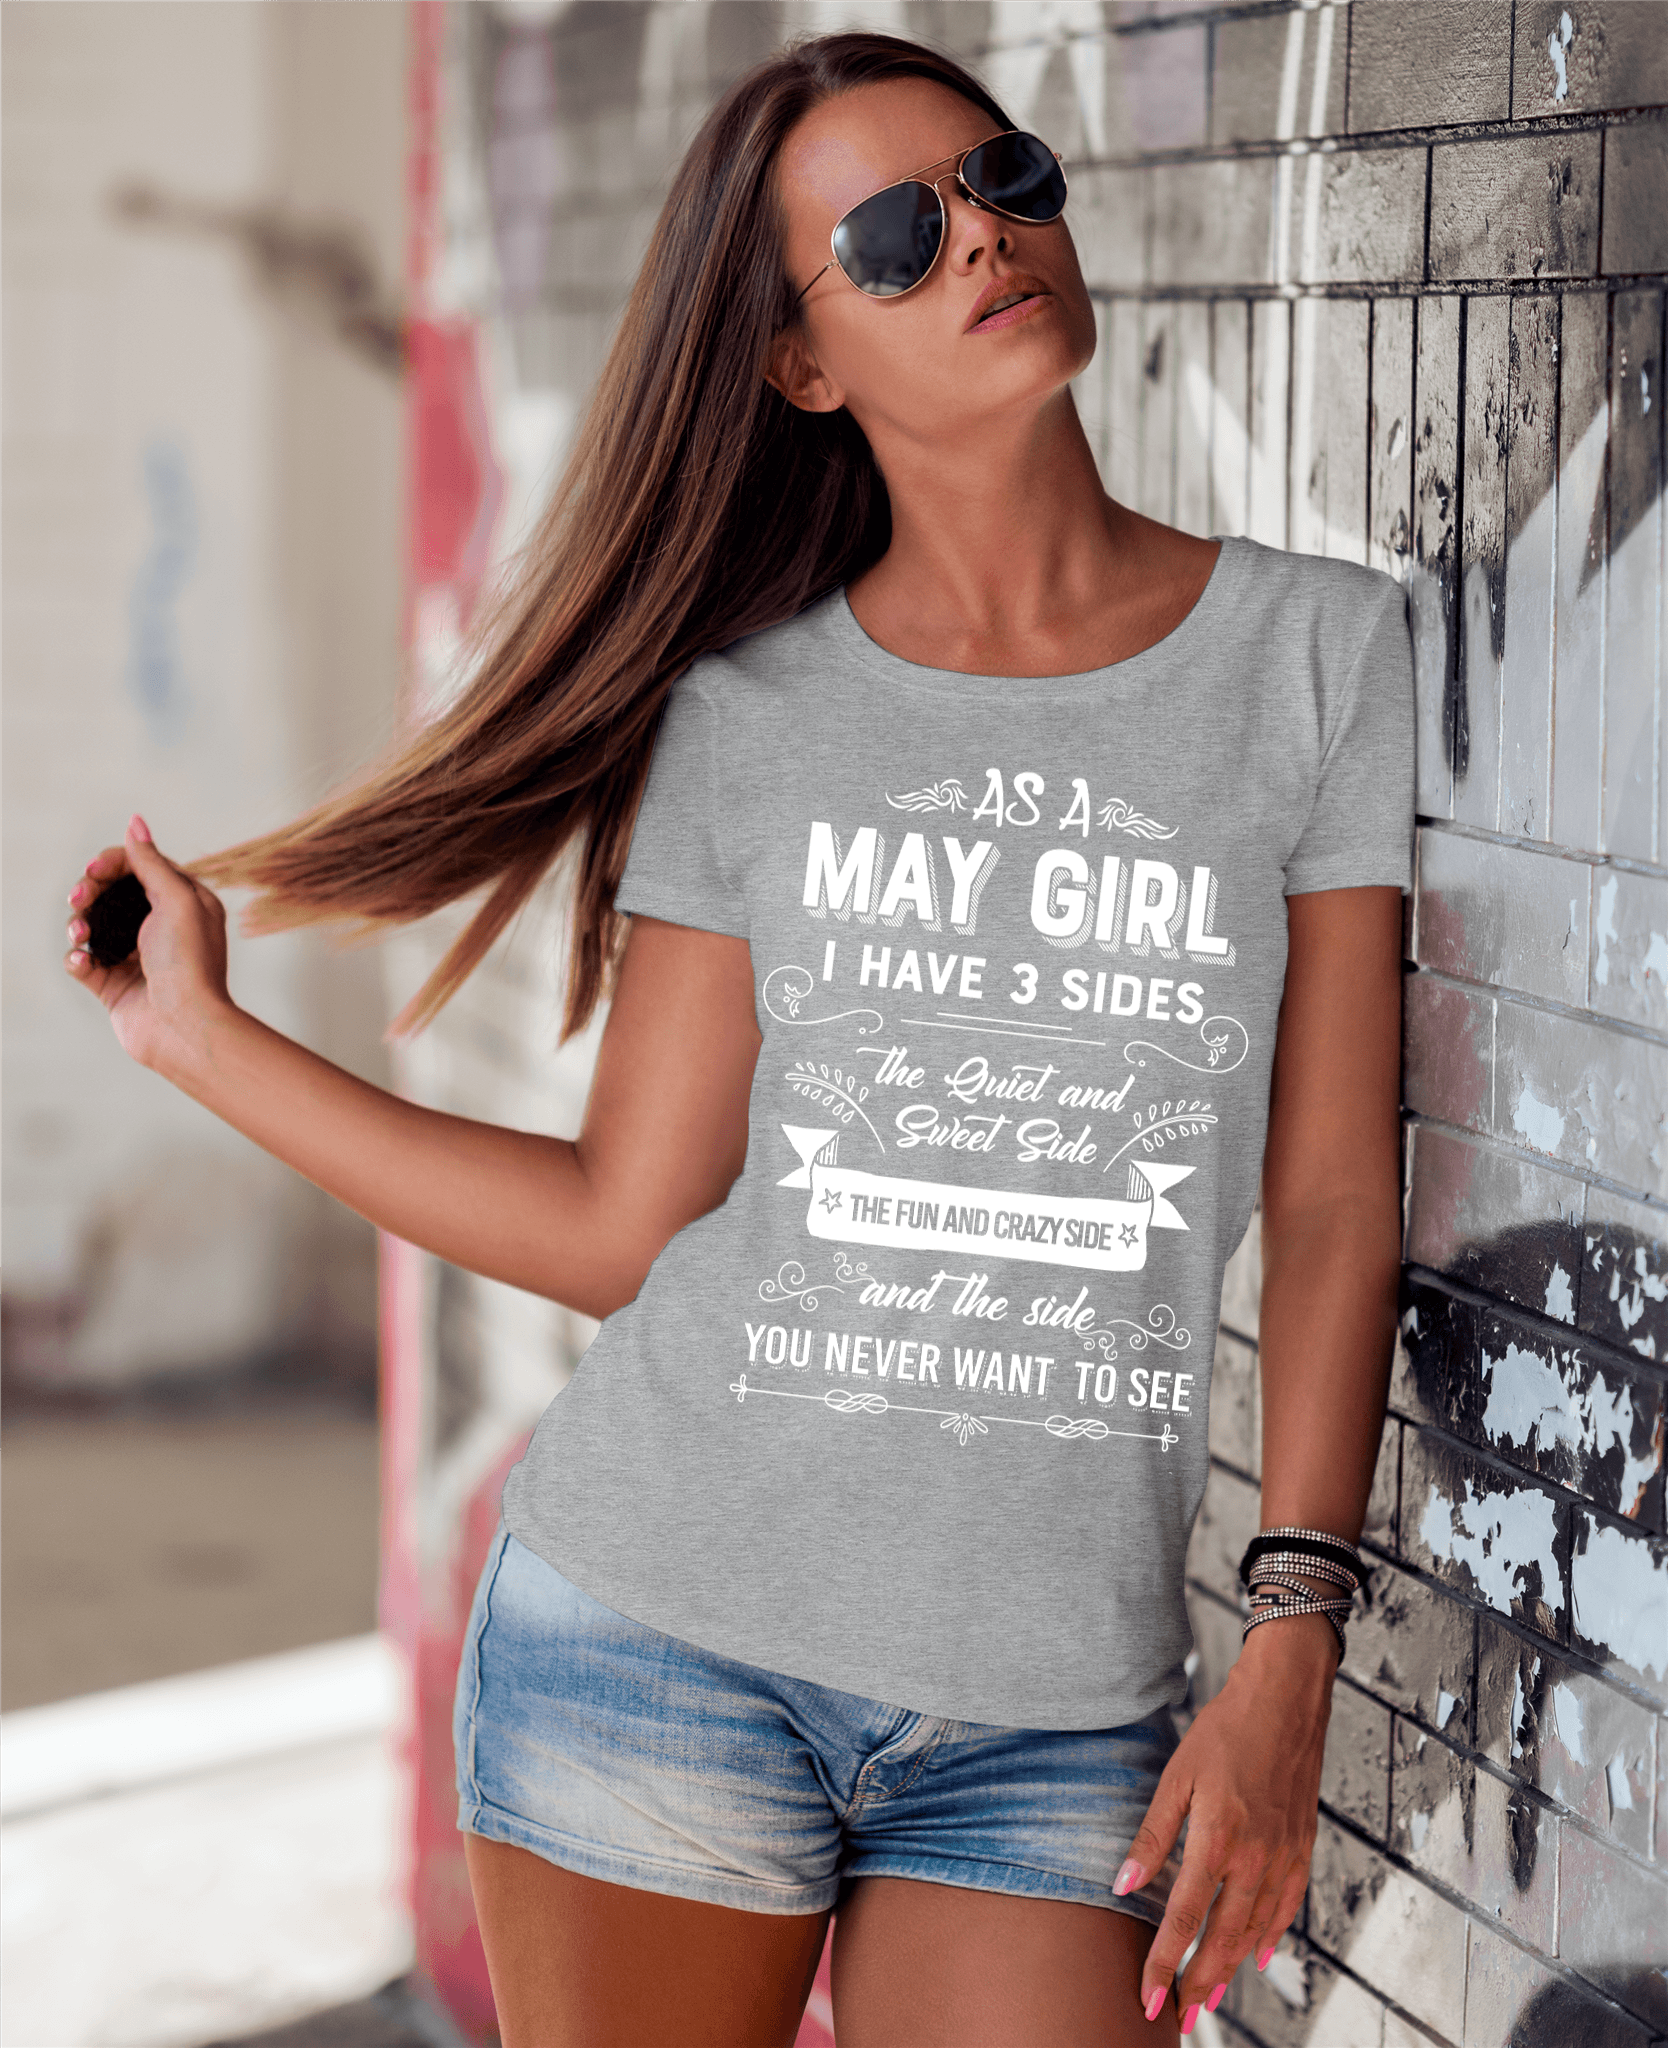 "May Combo (Sunflower And 3 Sides)" Pack of 2 Shirts